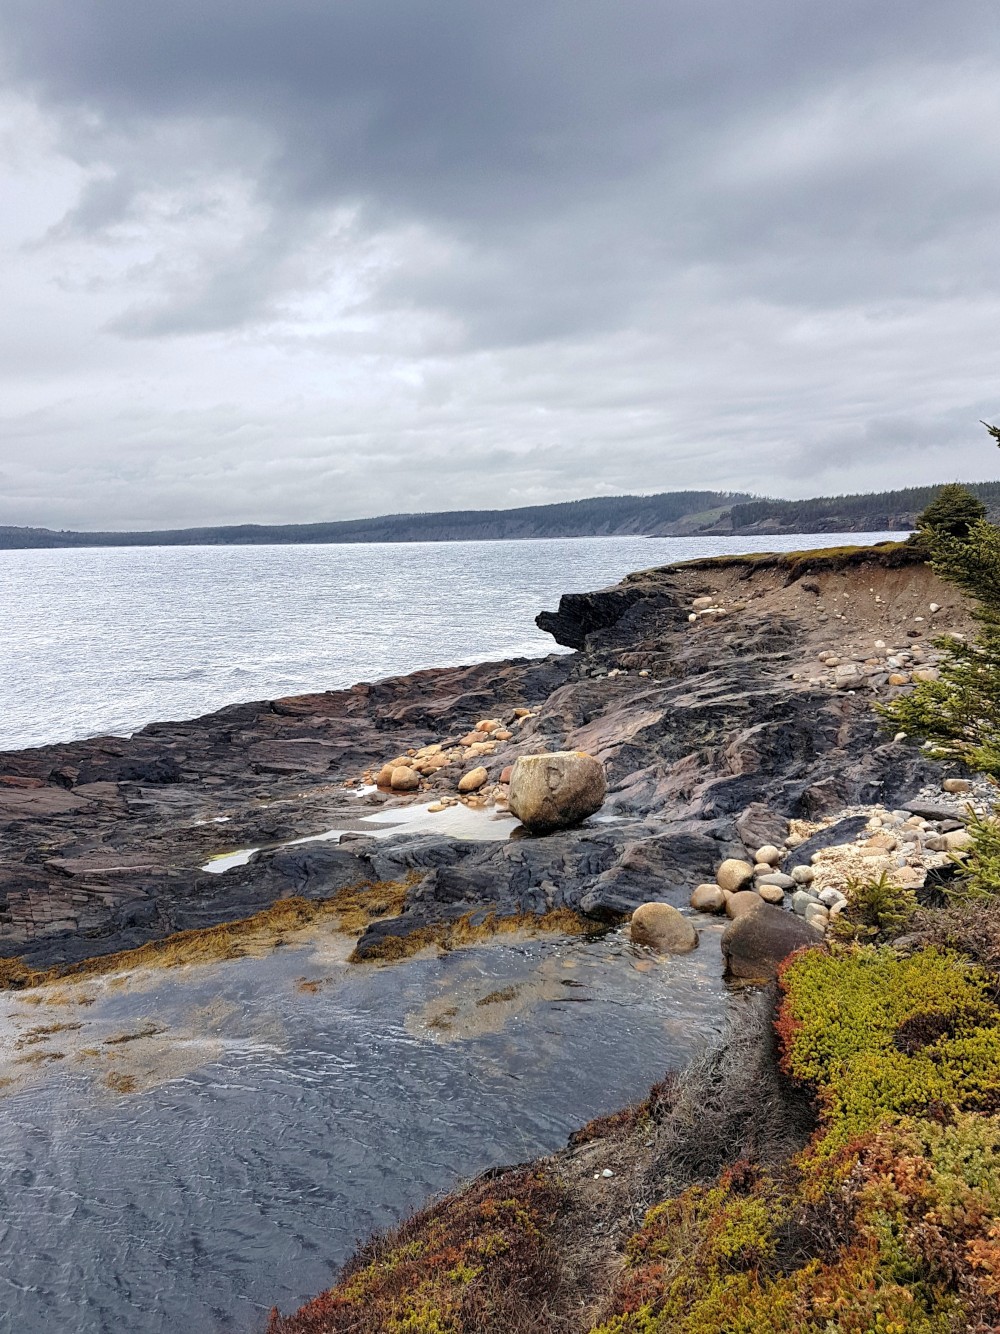 Gaff Point has some of the most beautiful coastal scenery along the Lighthouse Route.  This is a gorgeous part of the province.